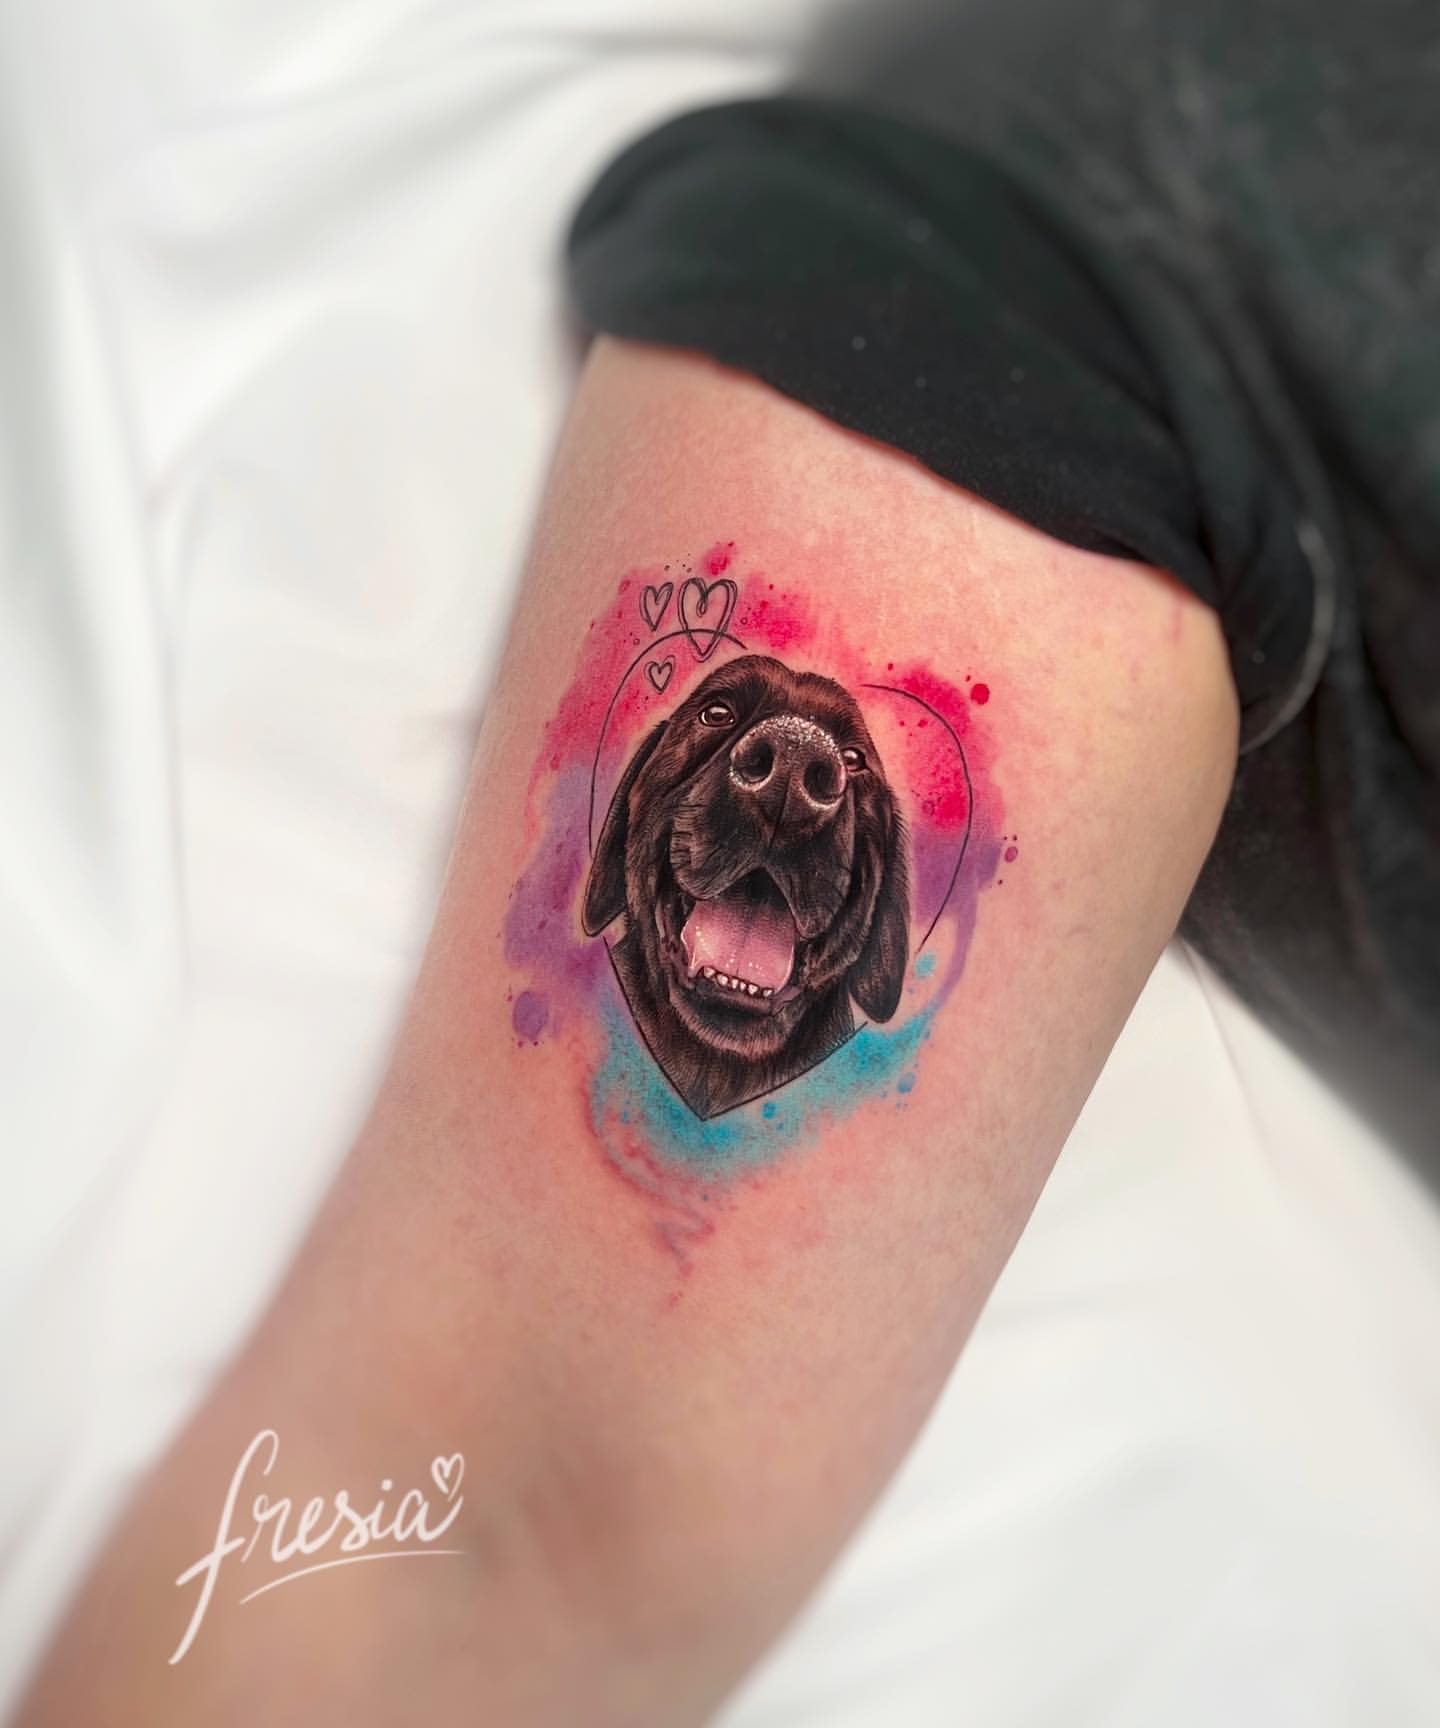 100 Adorable Dog Tattoos That Will Melt Your Heart  Tattoo Me Now